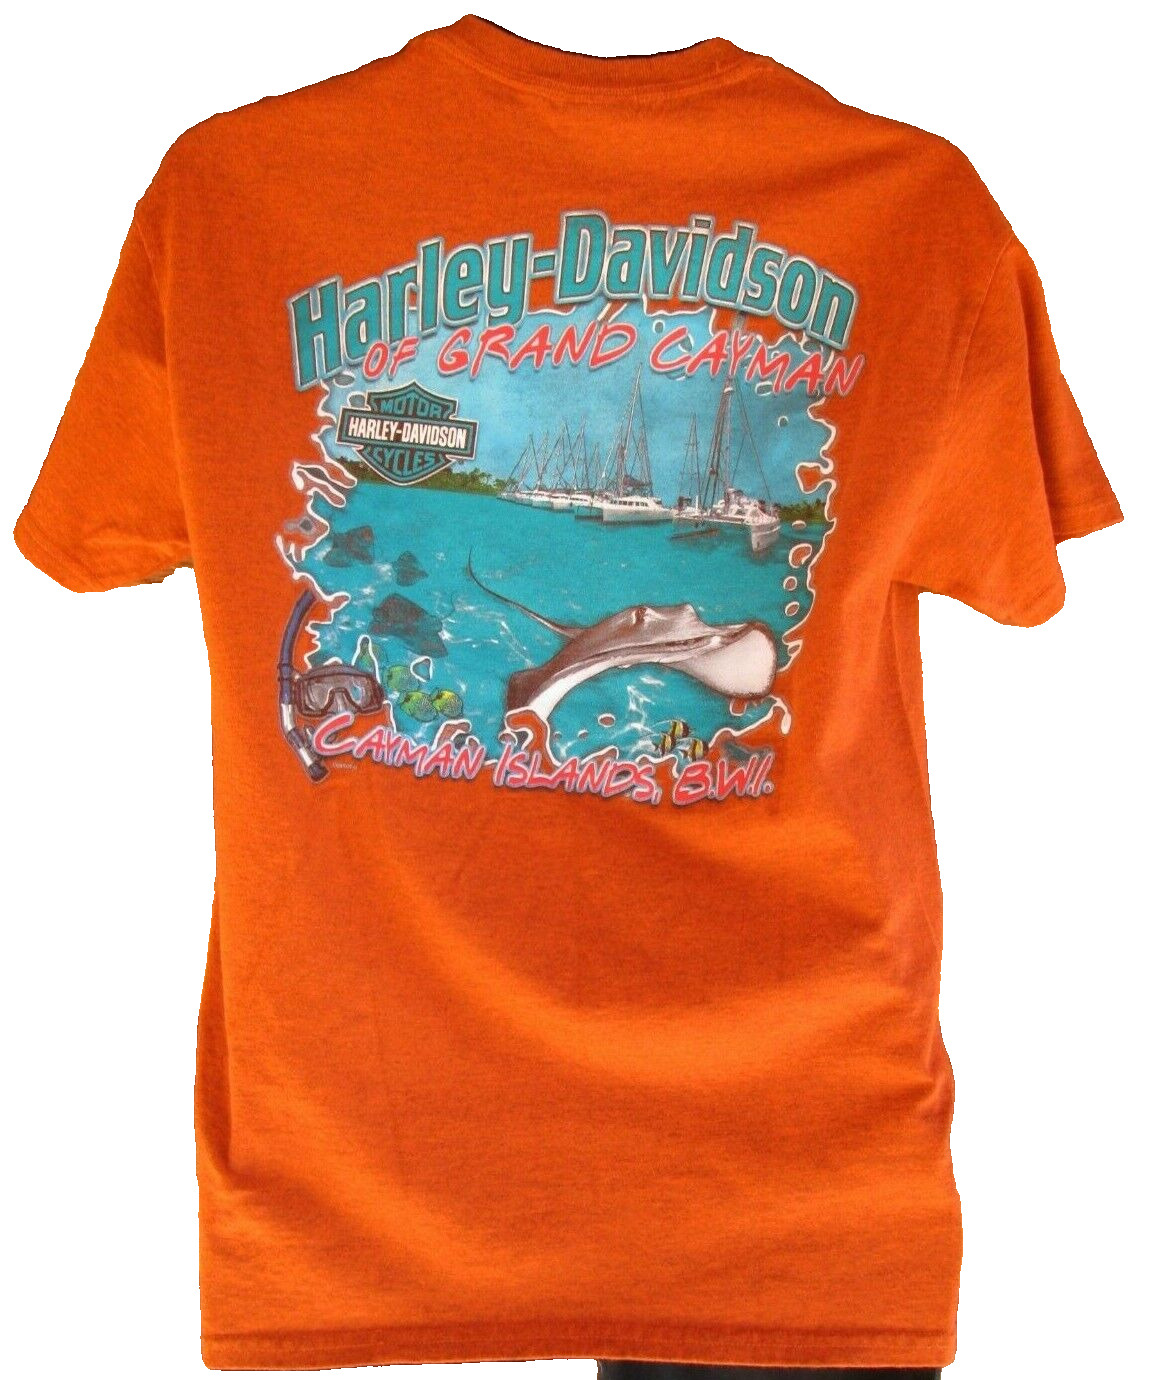 Harley Davidson Motorcycles T Shirt Grand Cayman Islands Sea Scape 2013 Size M